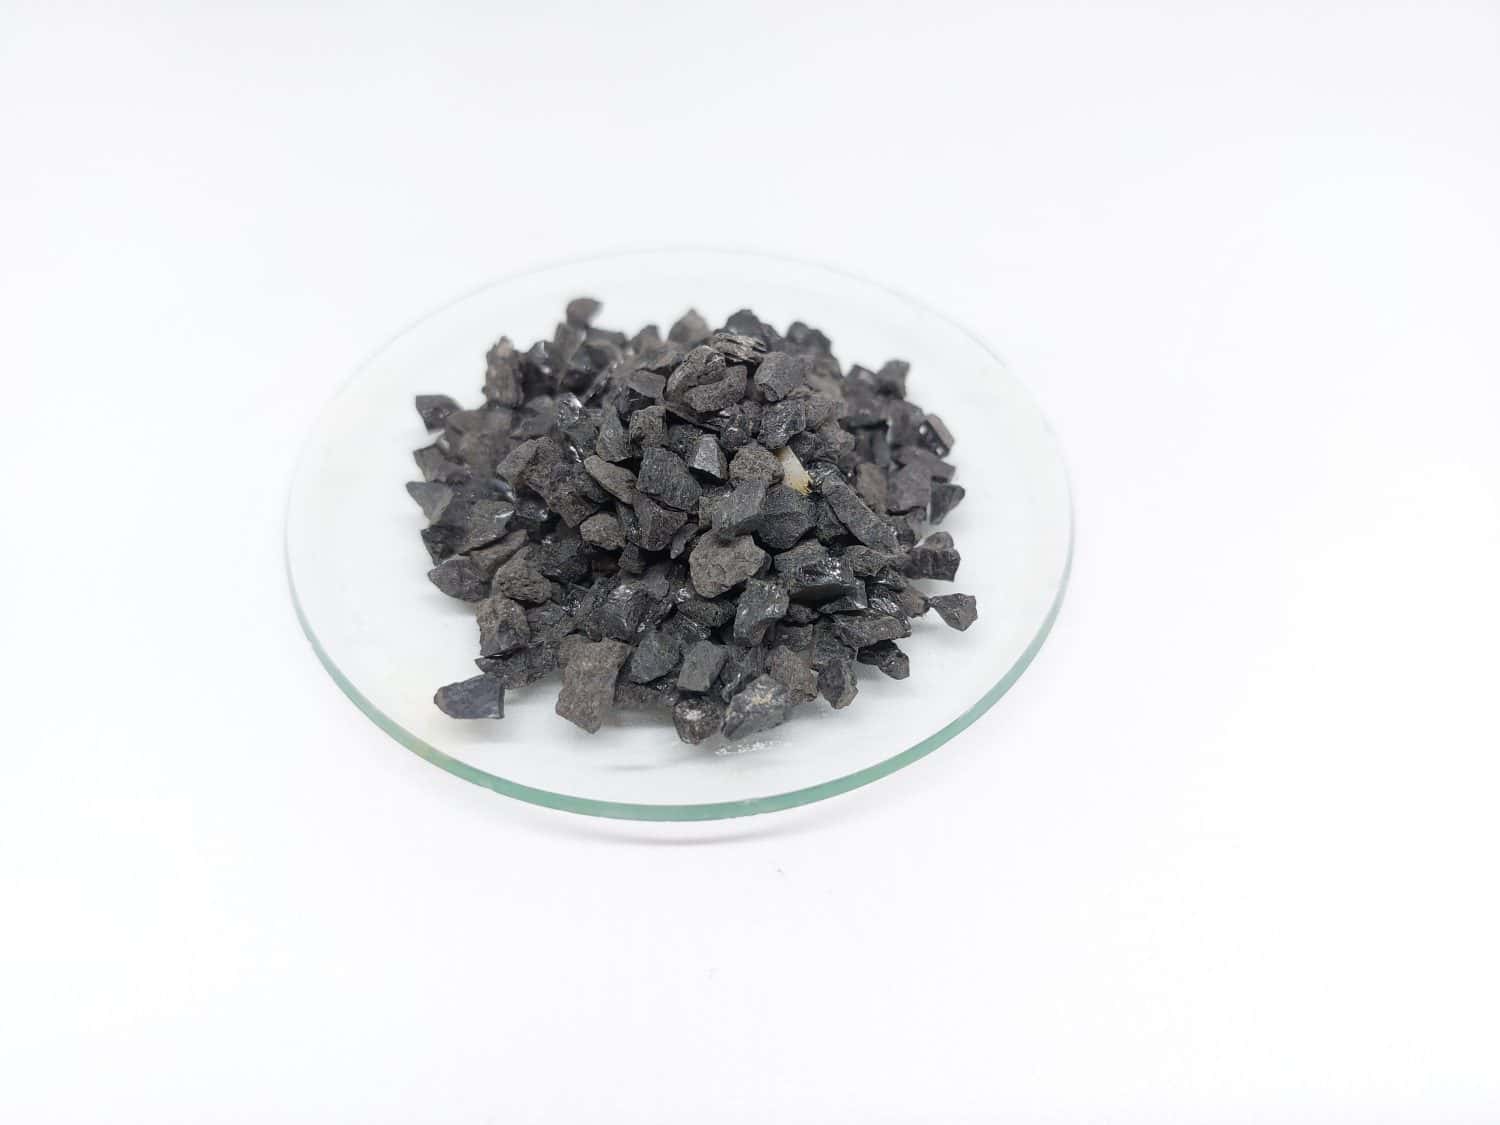 Anthracite commonly used in the water filtration to remove impurities and improve water quality. Anthracite known as hard black coal is acompact variety of coal. Isolated on white background